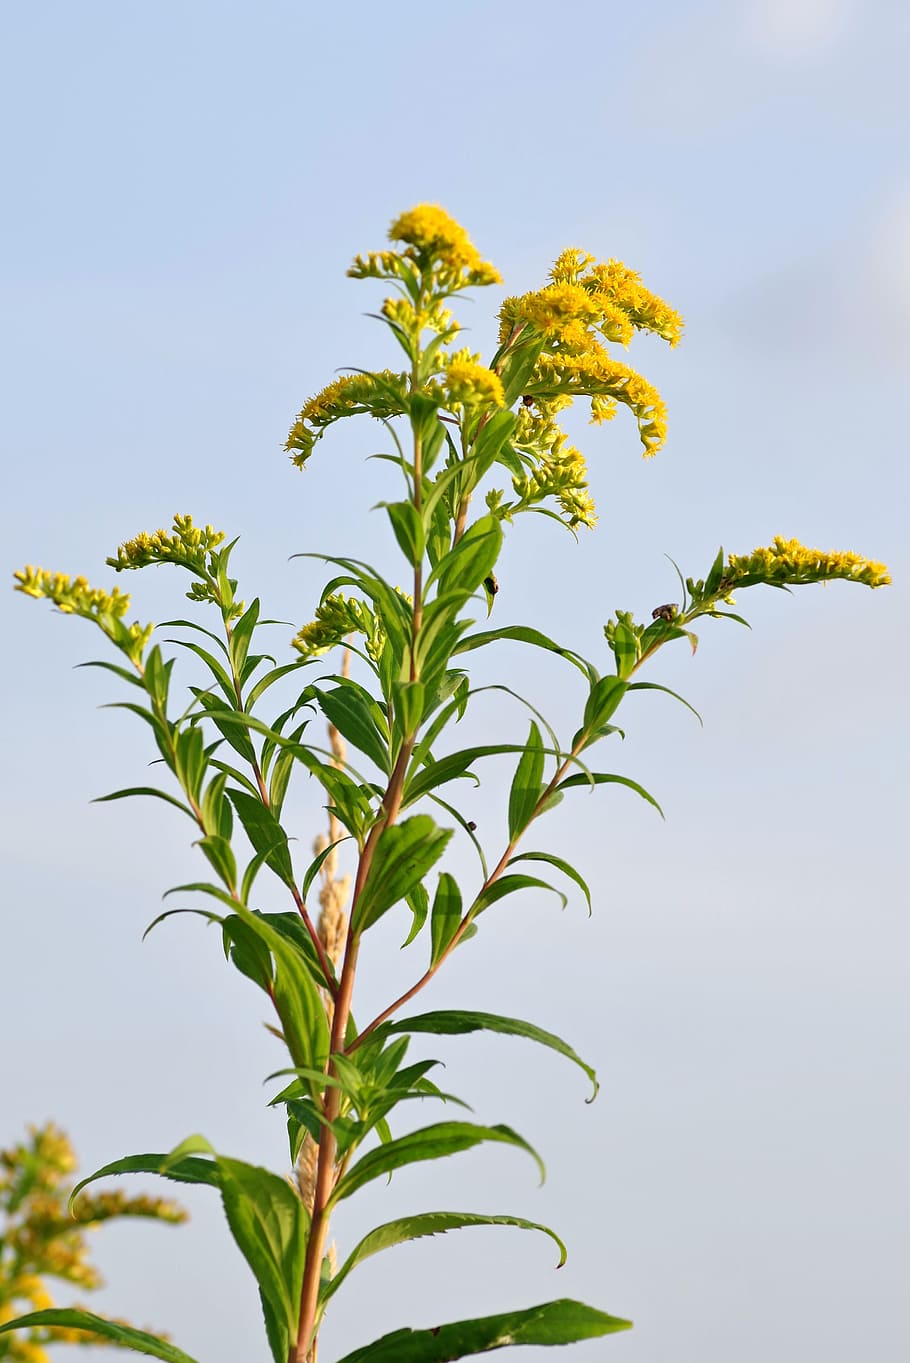 goldenrod, yellow, flowers, herb, plant, small flowers, yellow flowers, nature, branch, green